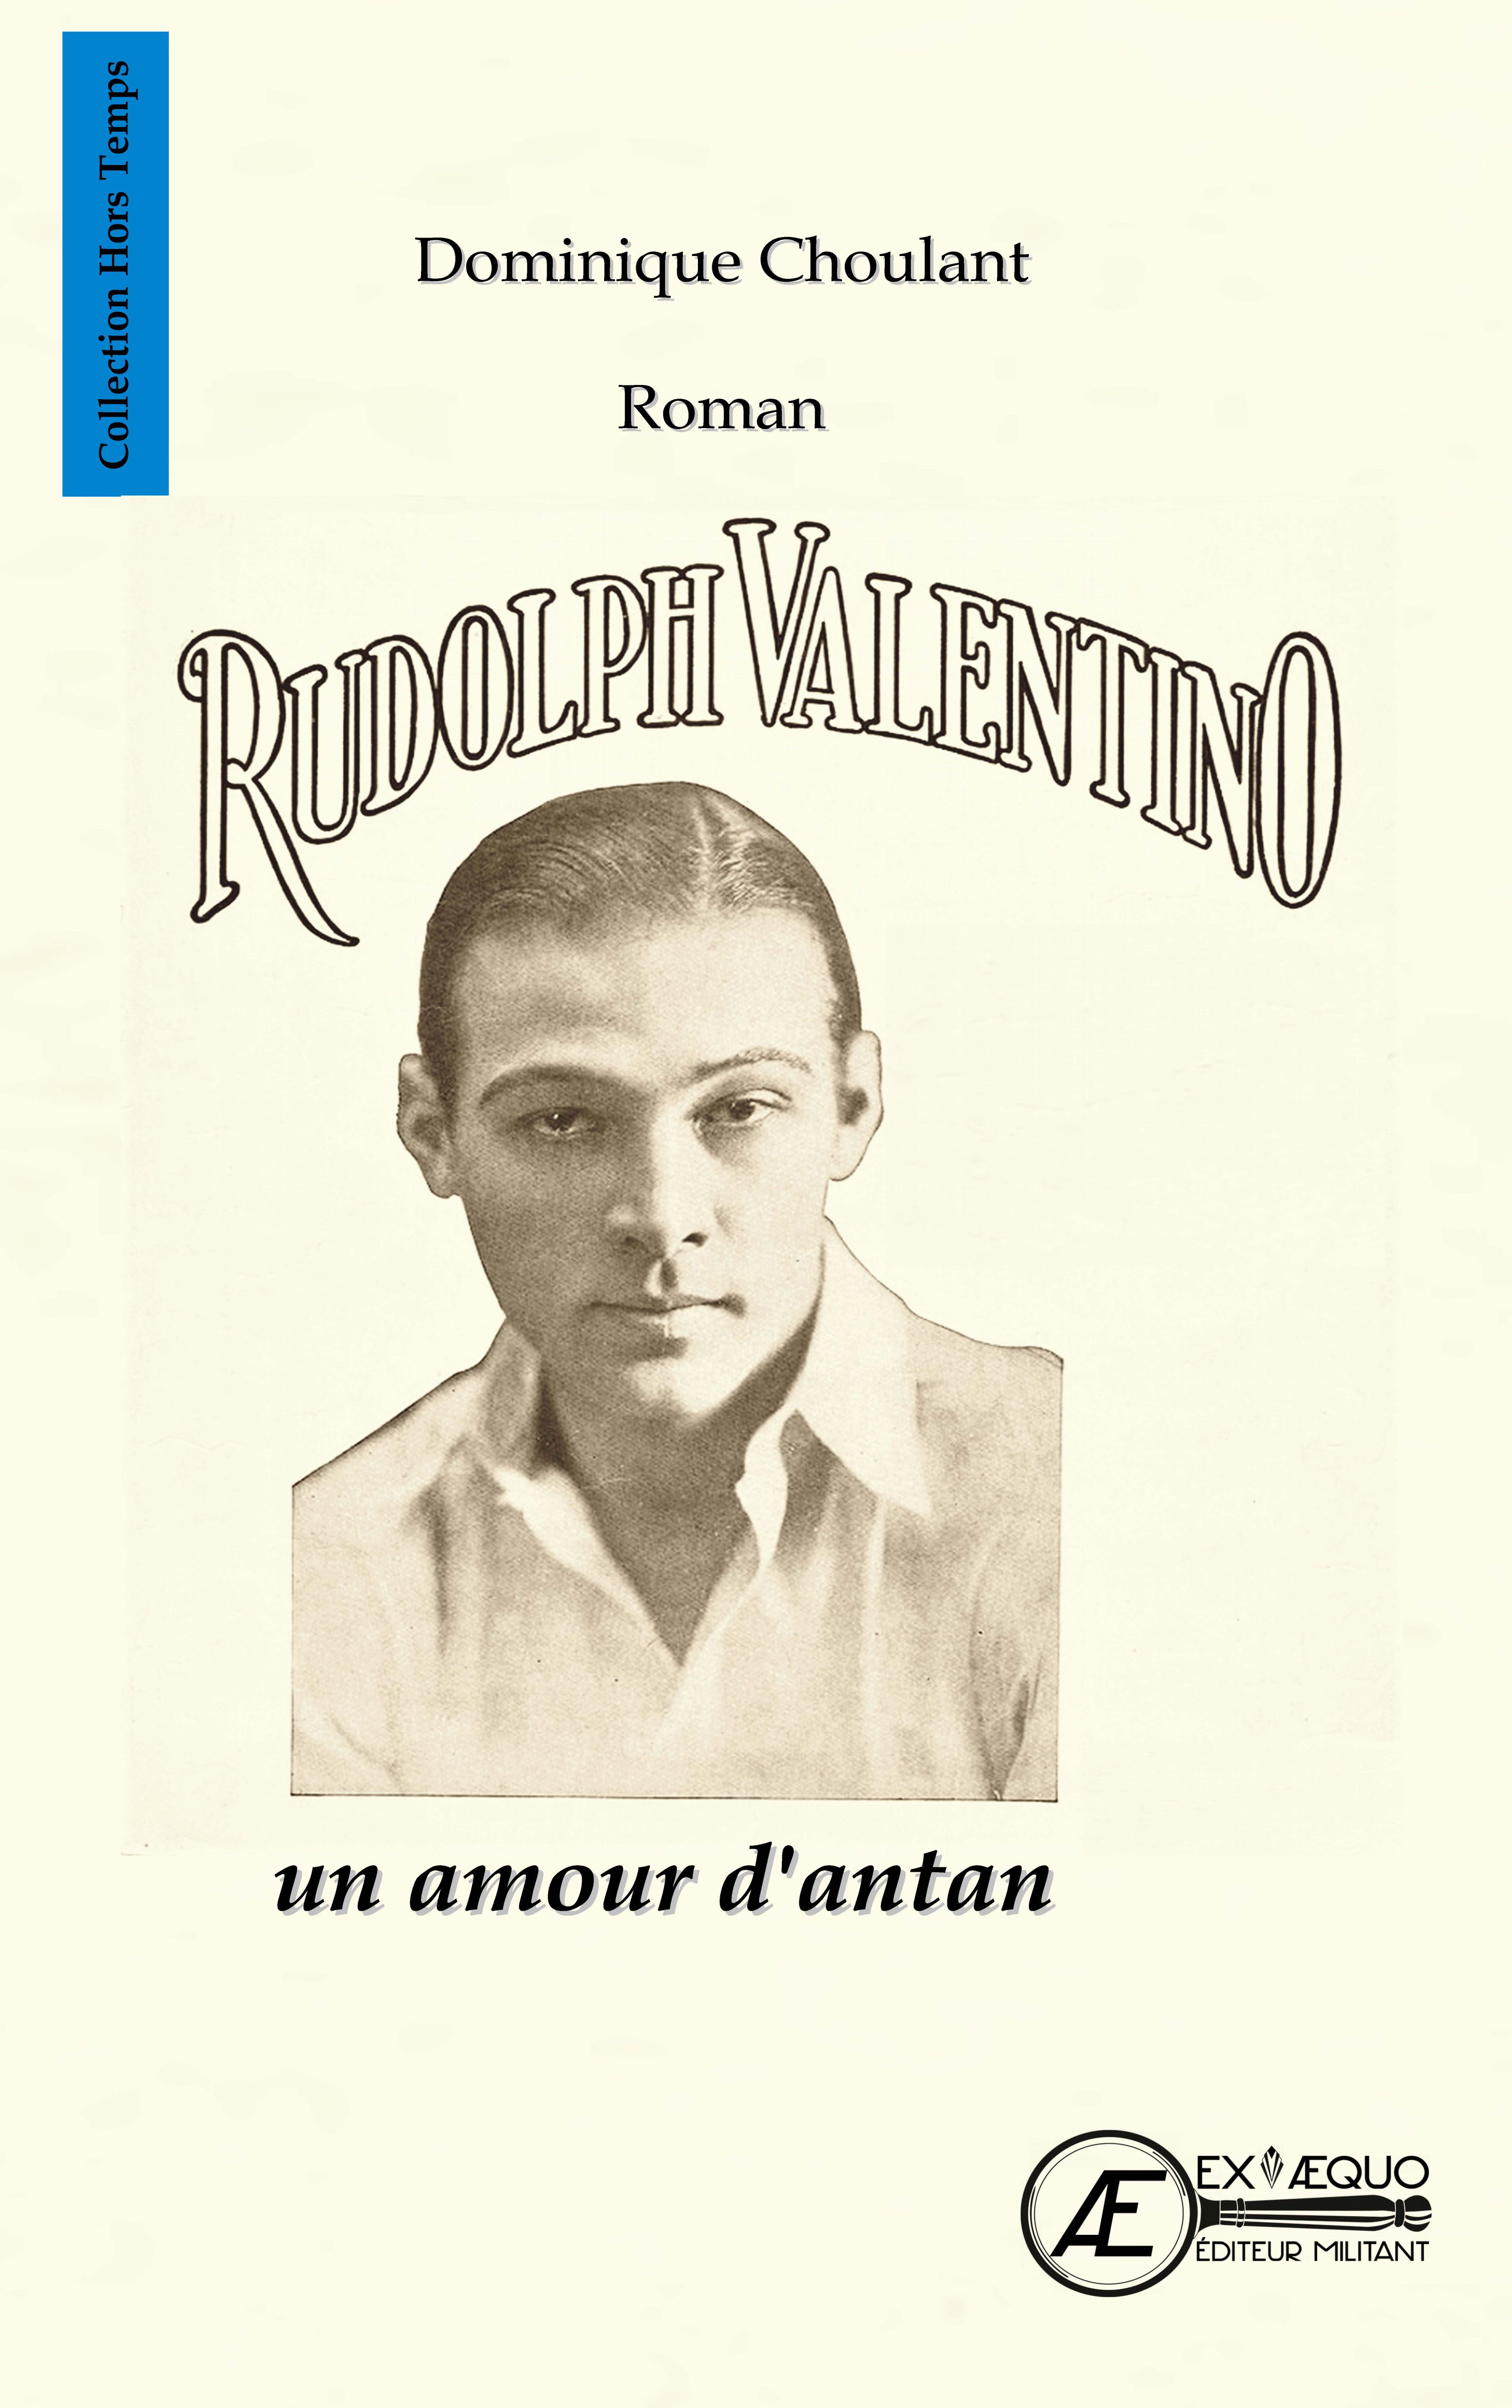 You are currently viewing Rudolph Valentino, un amour d’antan, de Dominique Choulant